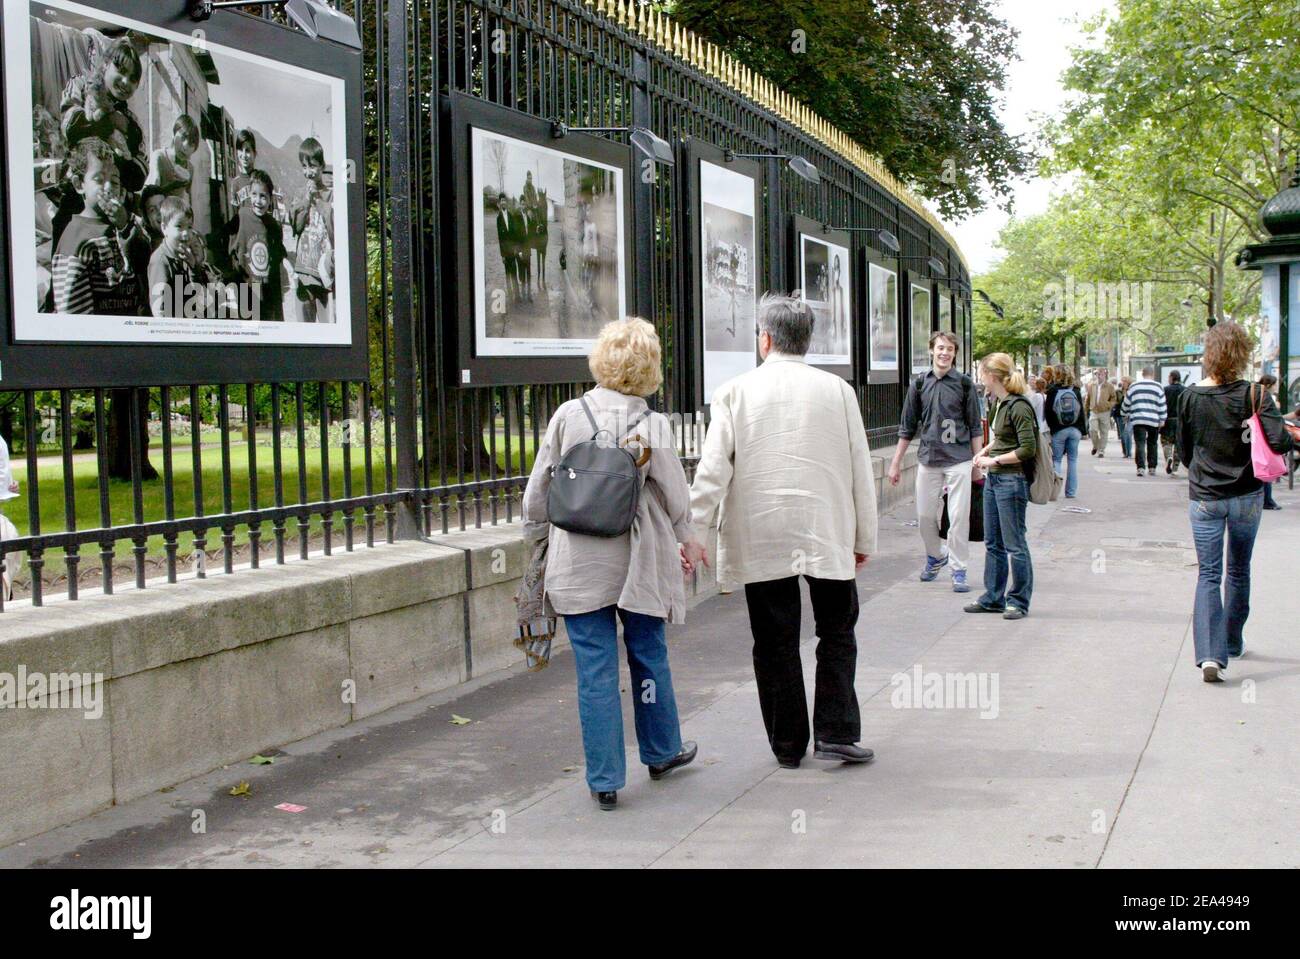 Around 20 photographers, like Willy Ronis, James Nachtwey, Sebastien Salgado and Marc Riboud expose their photographies on the Luxembourg Garden railings in Paris, on June 3, 2005, to celebrate the 20th anniversary of Reporters without Borders. Photo by Mehdi Taamallah/ABACA. Stock Photo